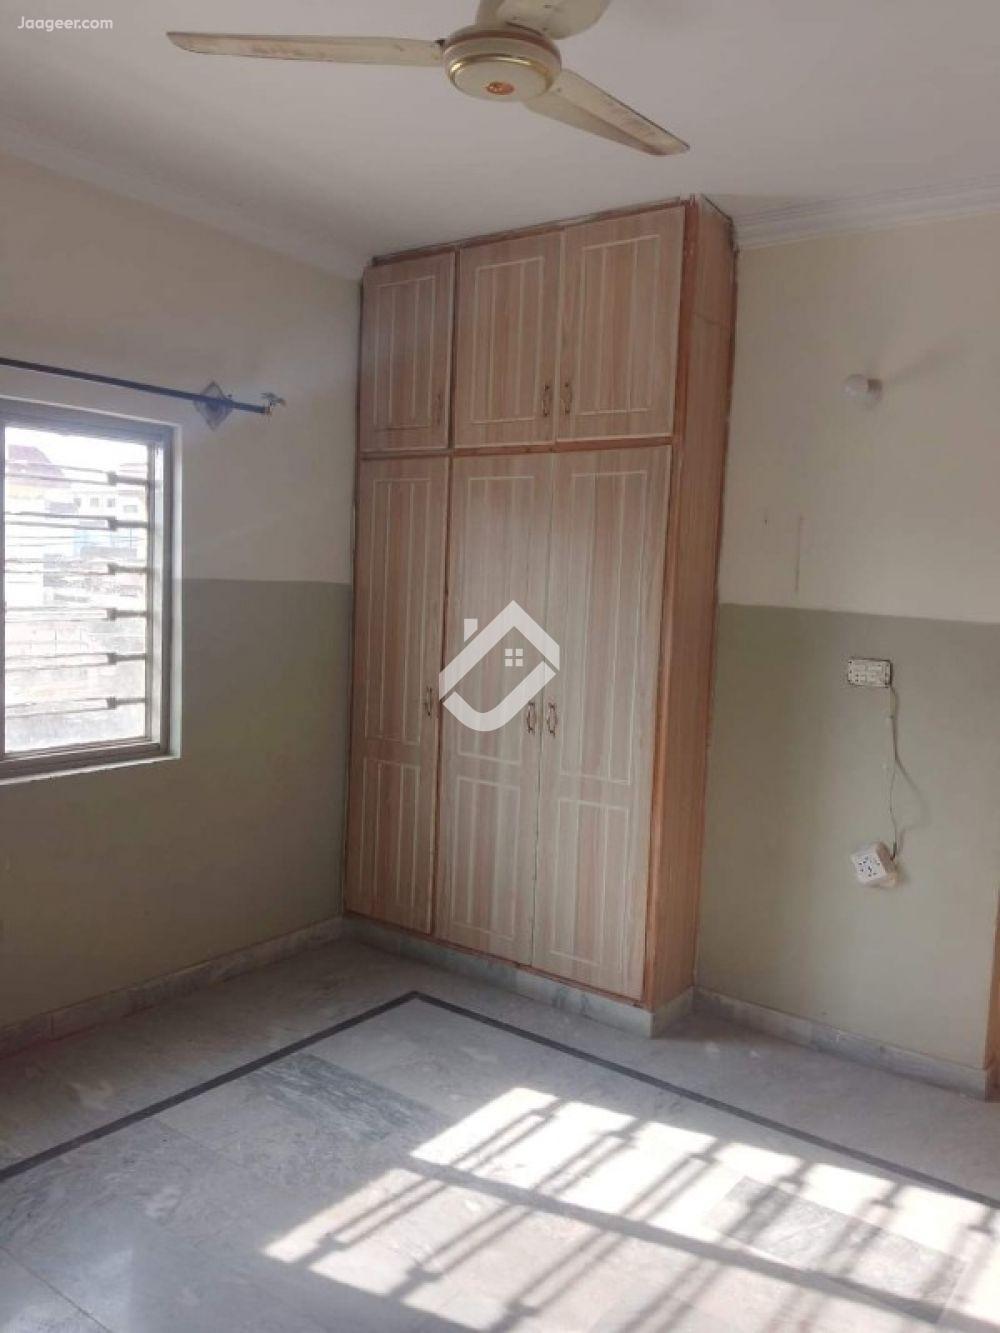 View  5 Marla 2nd Floor House For Rent In Ghauri Town Phase-3 in Ghauri Town, Islamabad